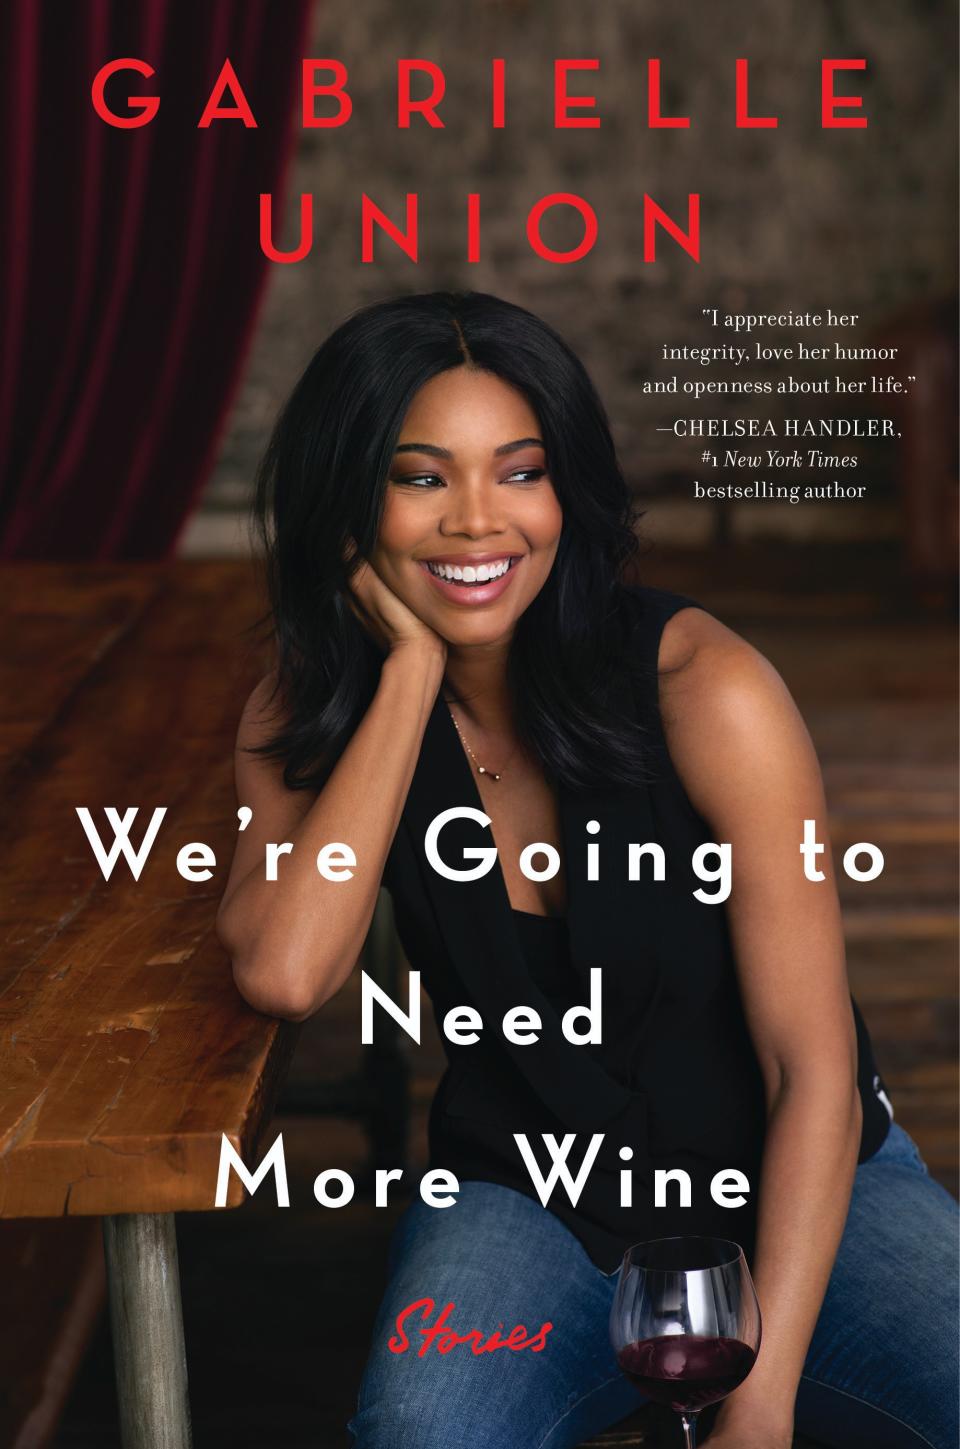 The 'Being Mary Jane' star’s new book was released on Tuesday.